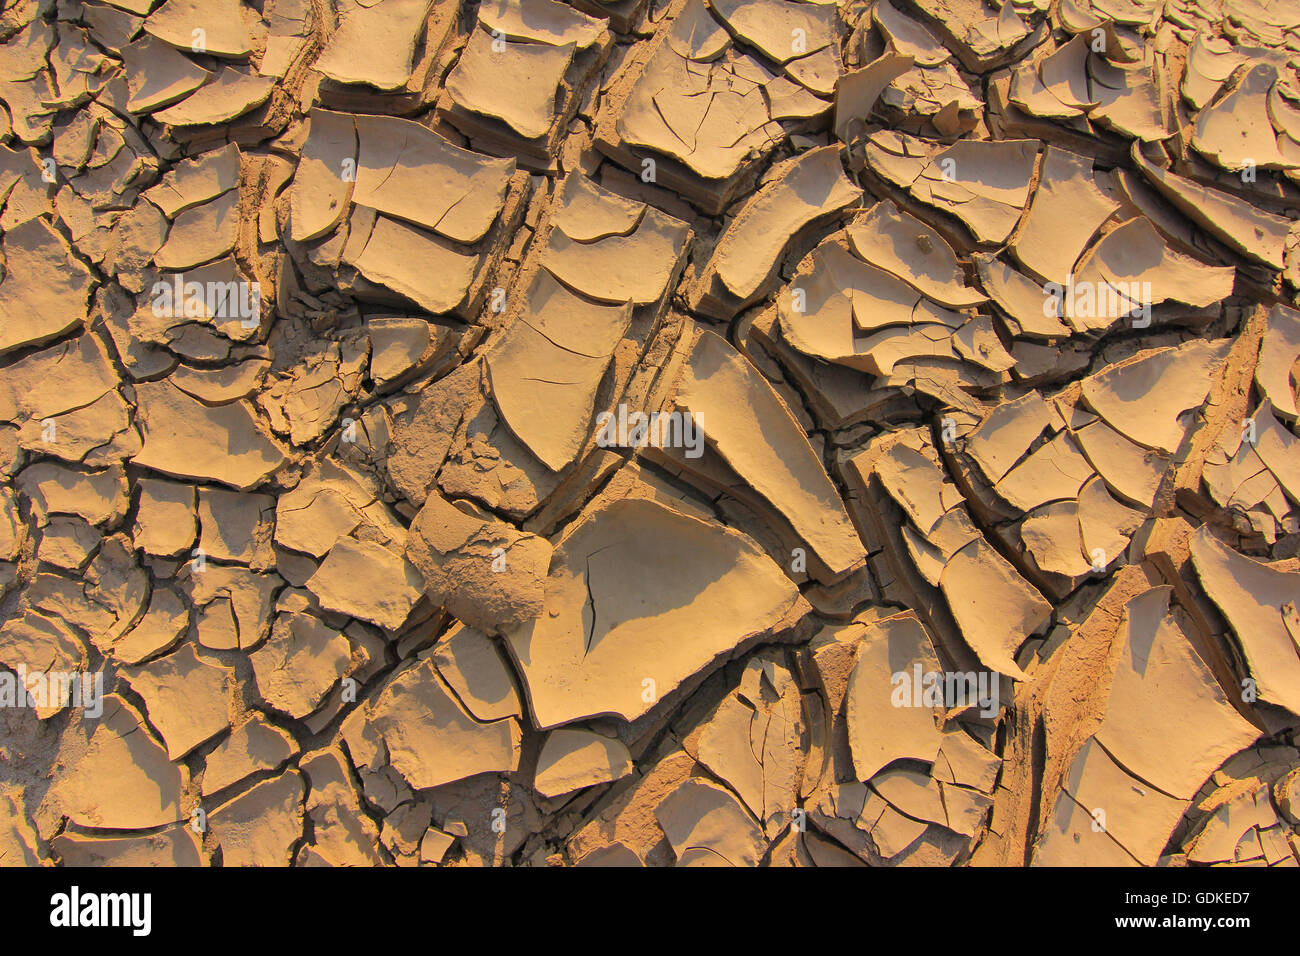 The soil surface Beyond the dryness of the climate. Stock Photo